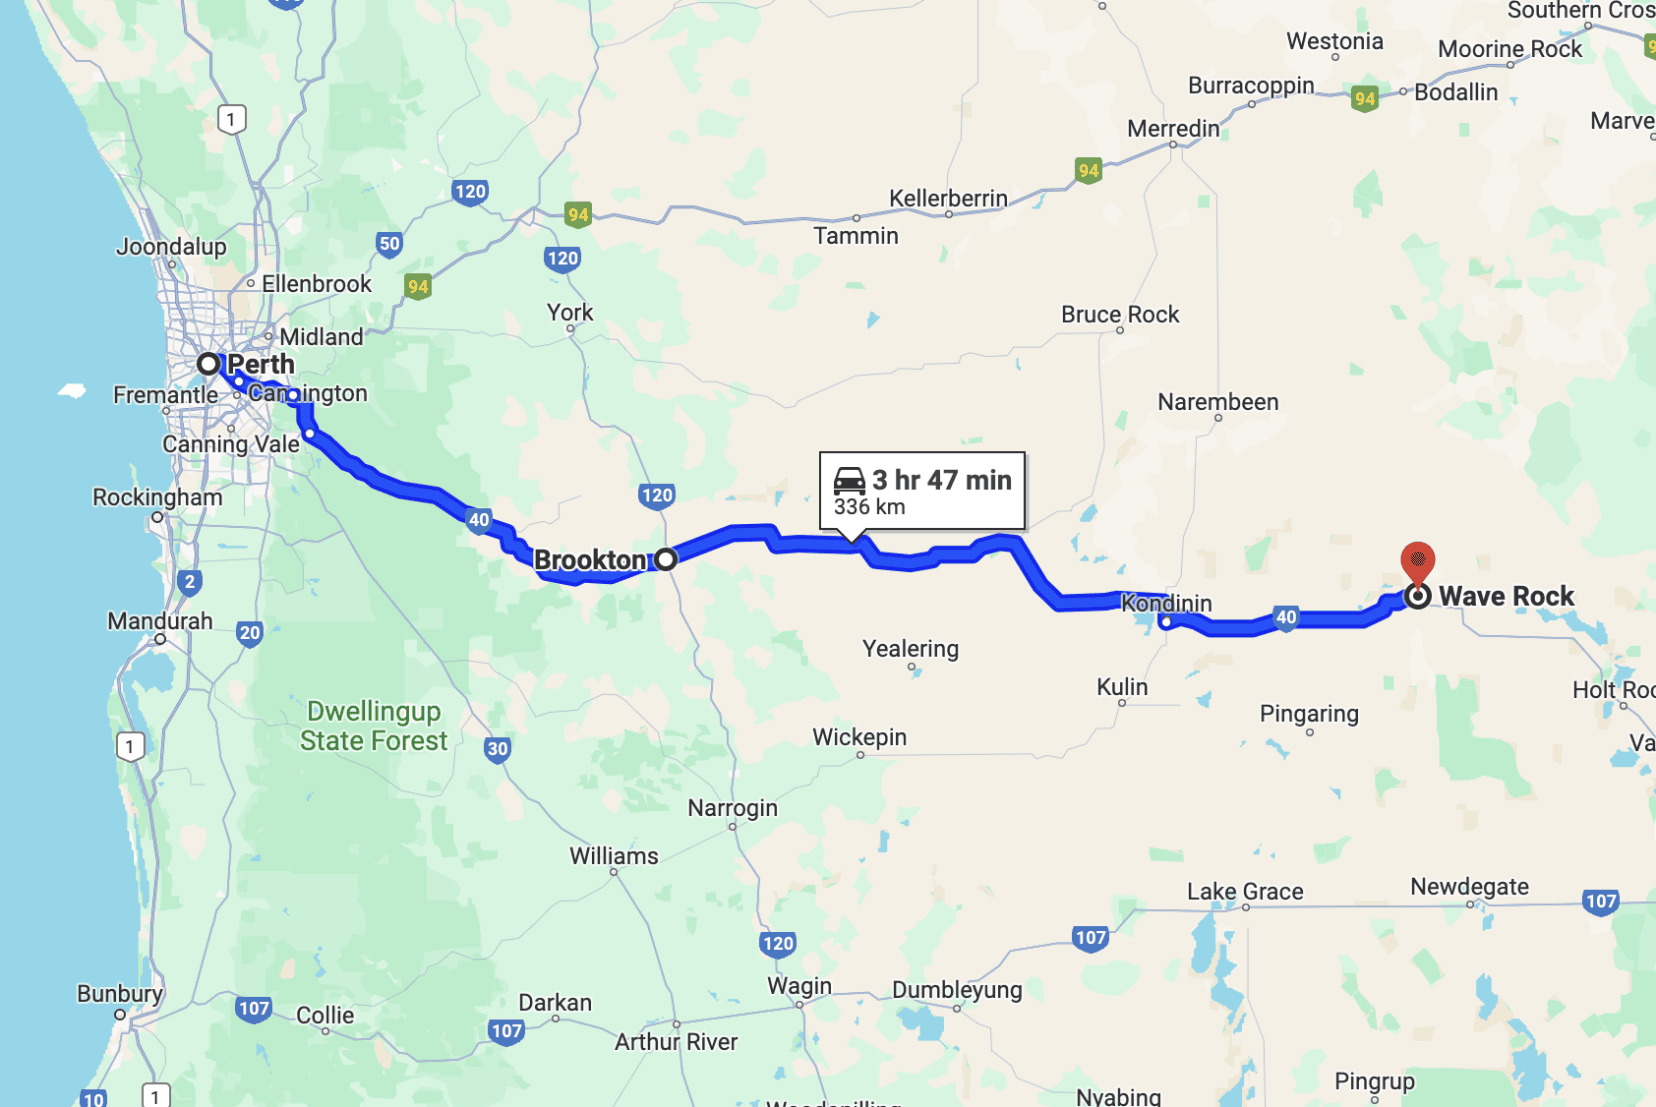 Perth to Wave Rock route on a map bia brookton 3 hrs 56 mins